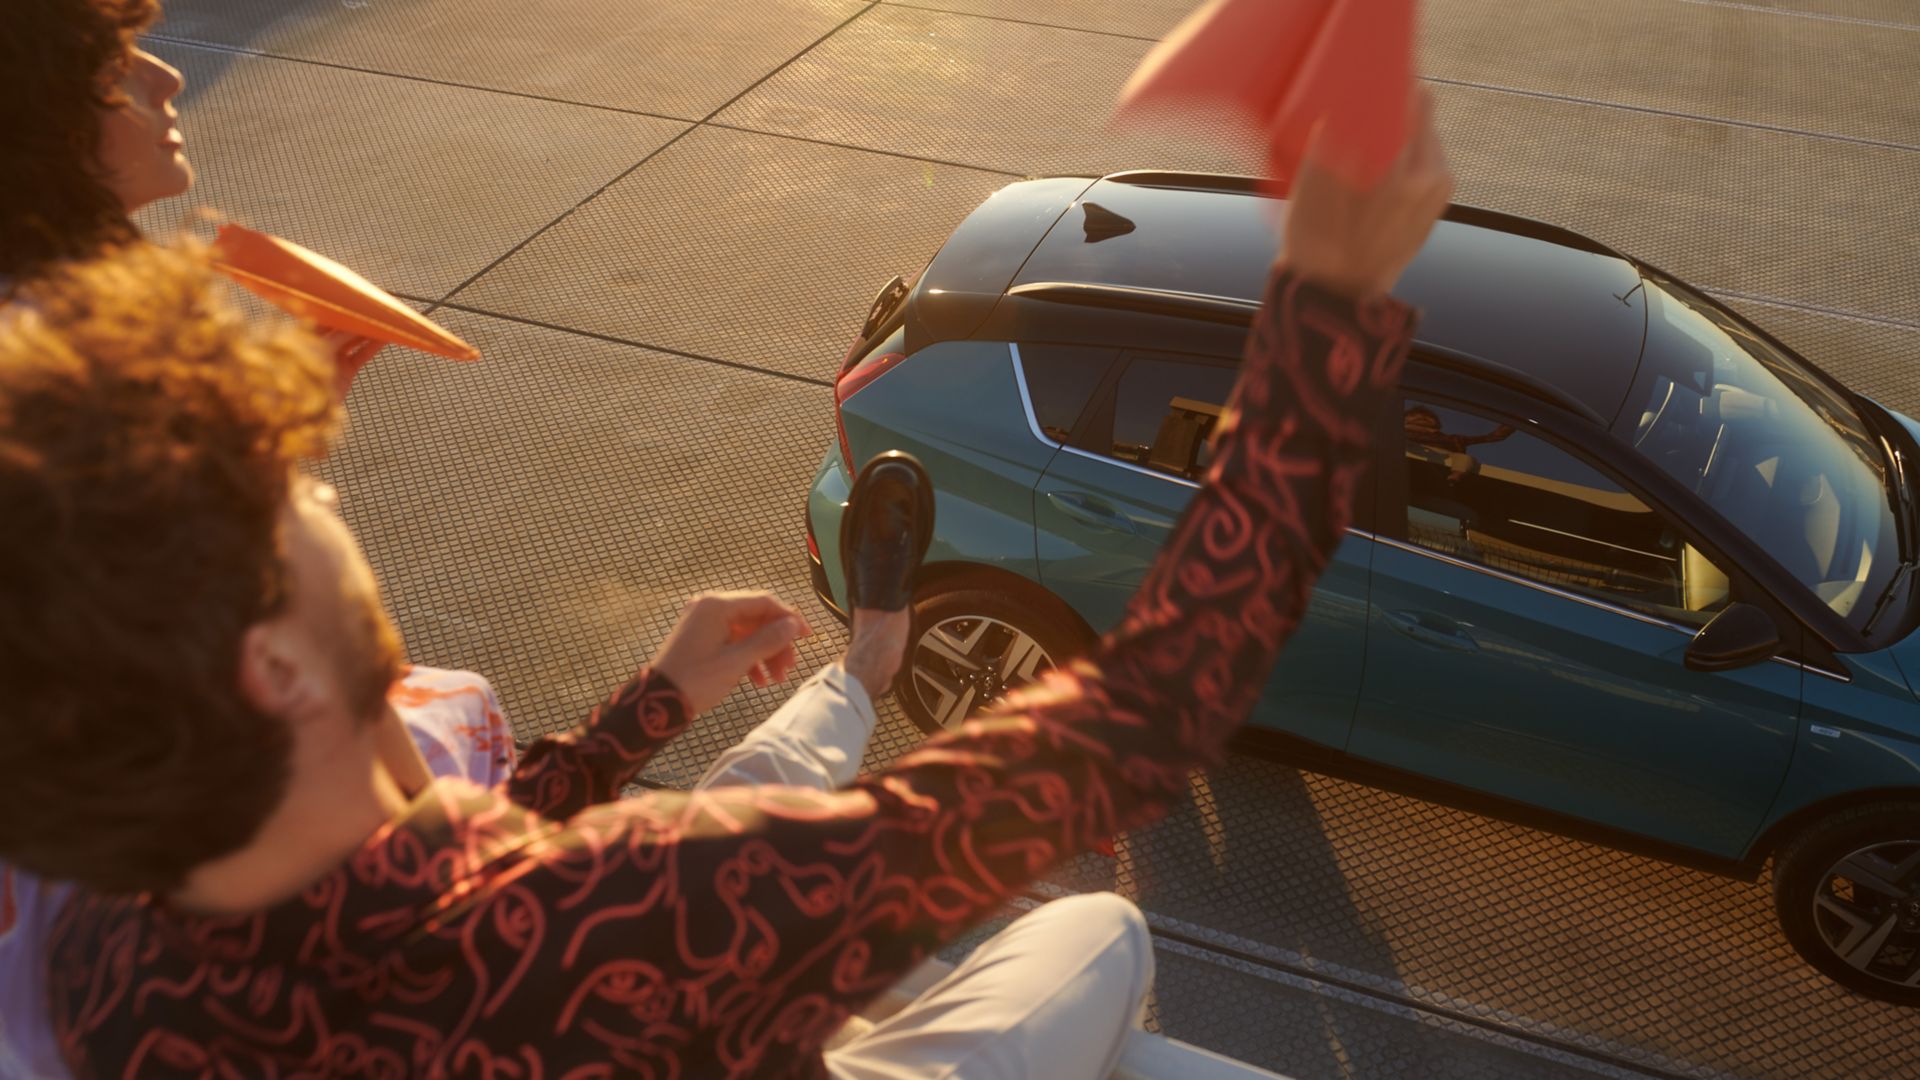 Two people throwing paper planes over the all-new Hyundai BAYON compact crossover SUV.